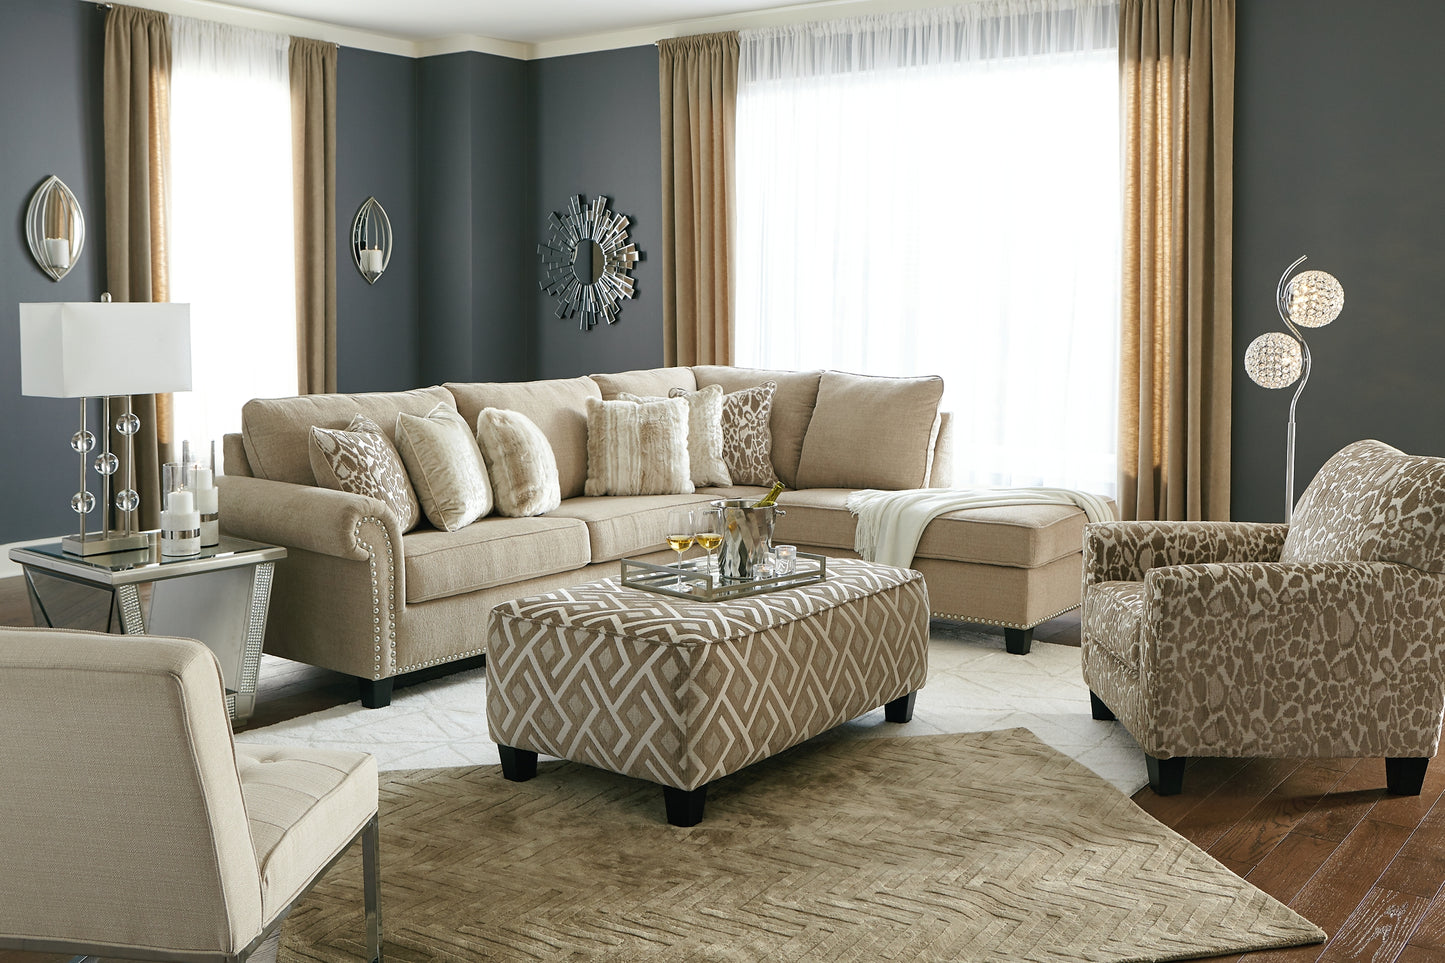 Dovemont 2-Piece Sectional with Chair and Ottoman Signature Design by Ashley®